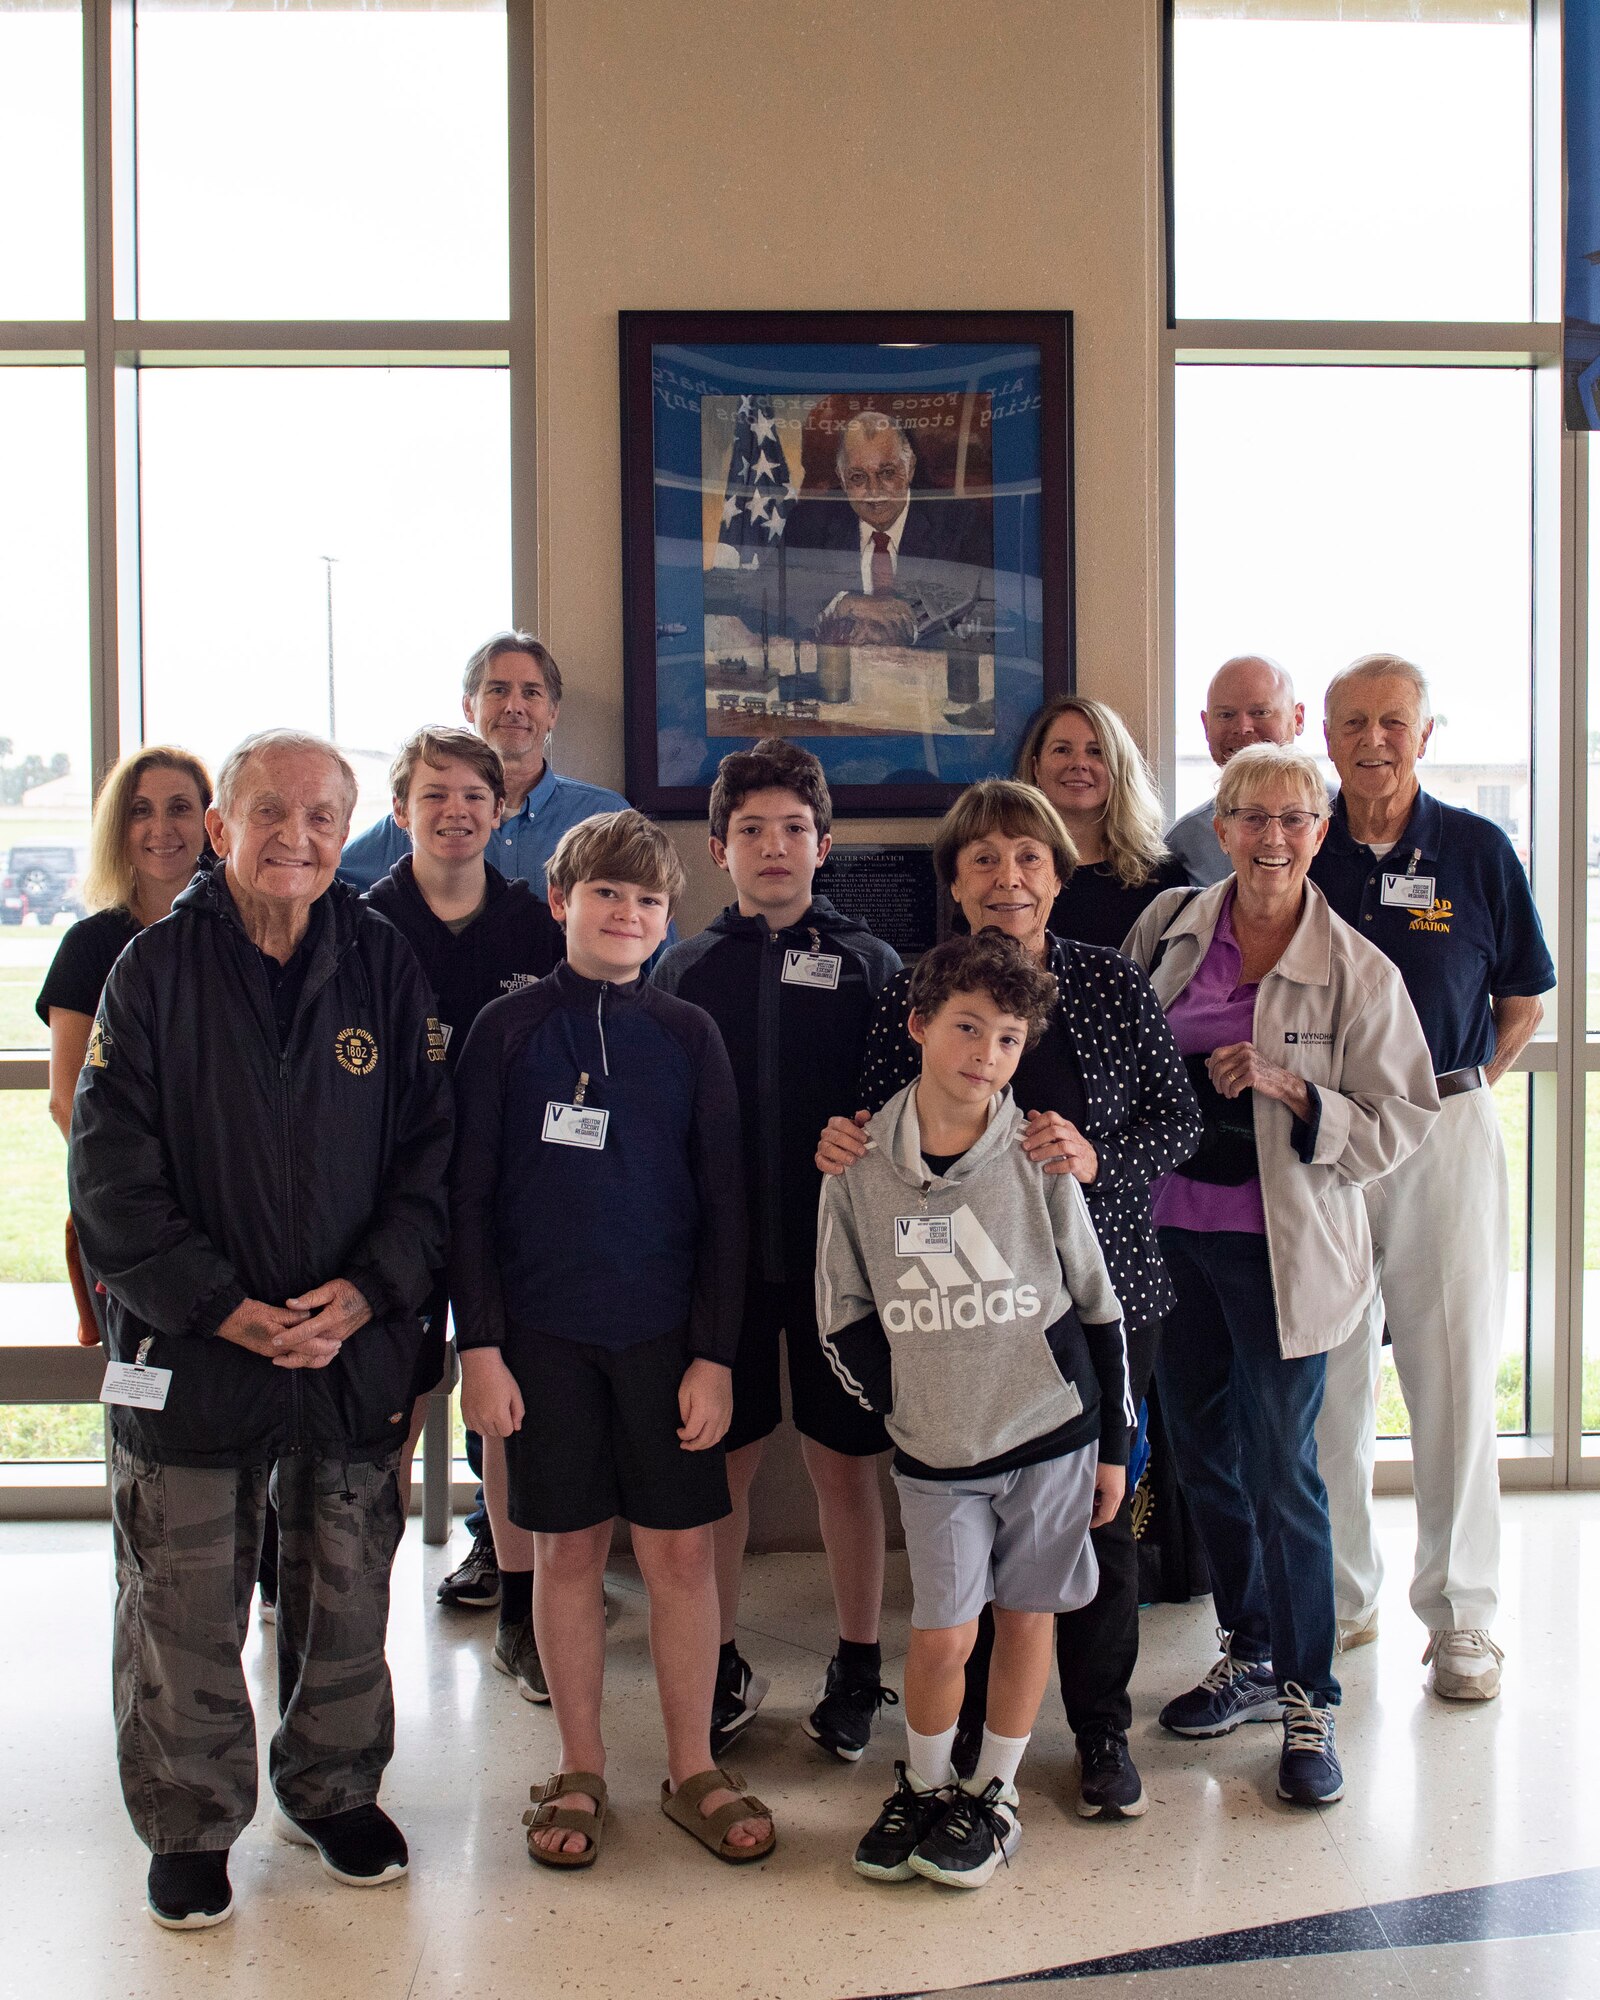 Family members of iconic leader and pioneer of long range detection Walt Singlevich pose for a group photo in front of Singlevich’s portrait and plaque dedicating the Department of Defense’s sole nuclear treaty monitoring center to AFTAC’s first Senior Scientist during the family’s visit to the center Nov. 22, 2022.  Pictured are Ellsworth Singlevich, Jonathan Lane, Trent Singlevich, Kimberly Lane, Brandon Lane, Spencer Singlevich, Melissa Singlevich, Sara Singlevich, Patrick Lane, Cynthia Singlevich, Paul Singlevich, and Jack Singlevich.  (U.S. Air Force photo by Matthew S. Jurgens)